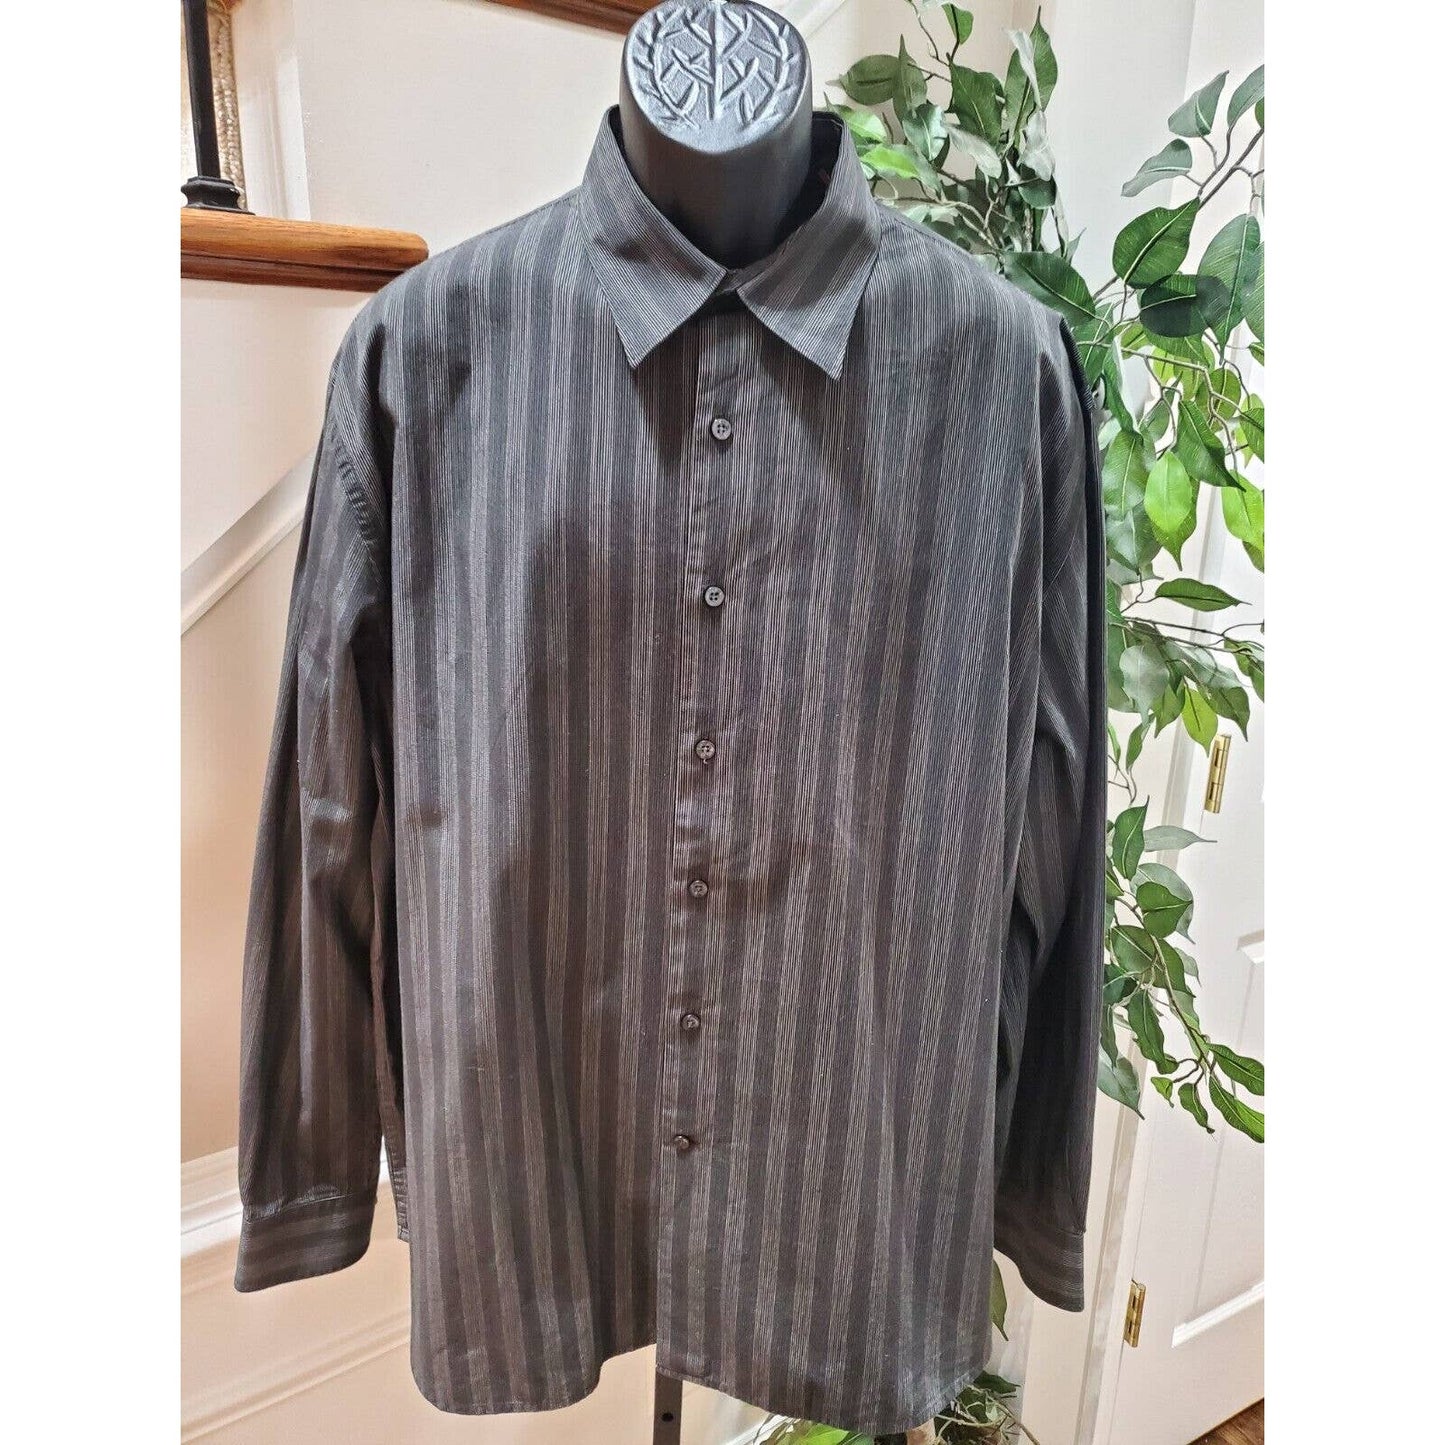 Perry Ellis Men Gray Striped Cotton Collared Long Sleeve Buttons Down Shirt 2XL